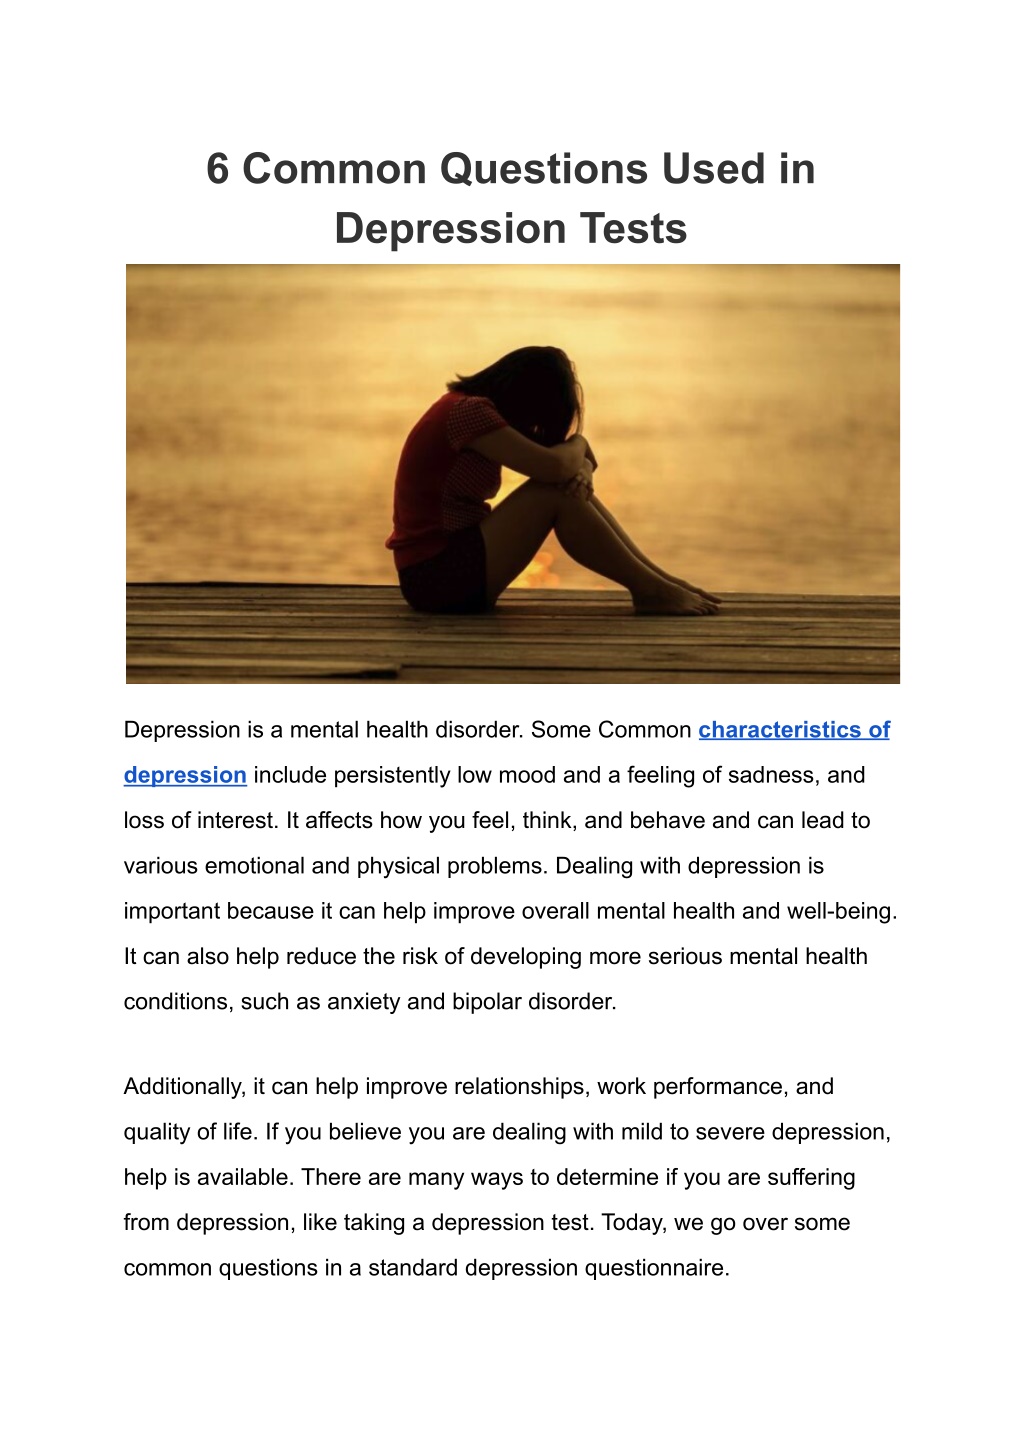 research questions depression